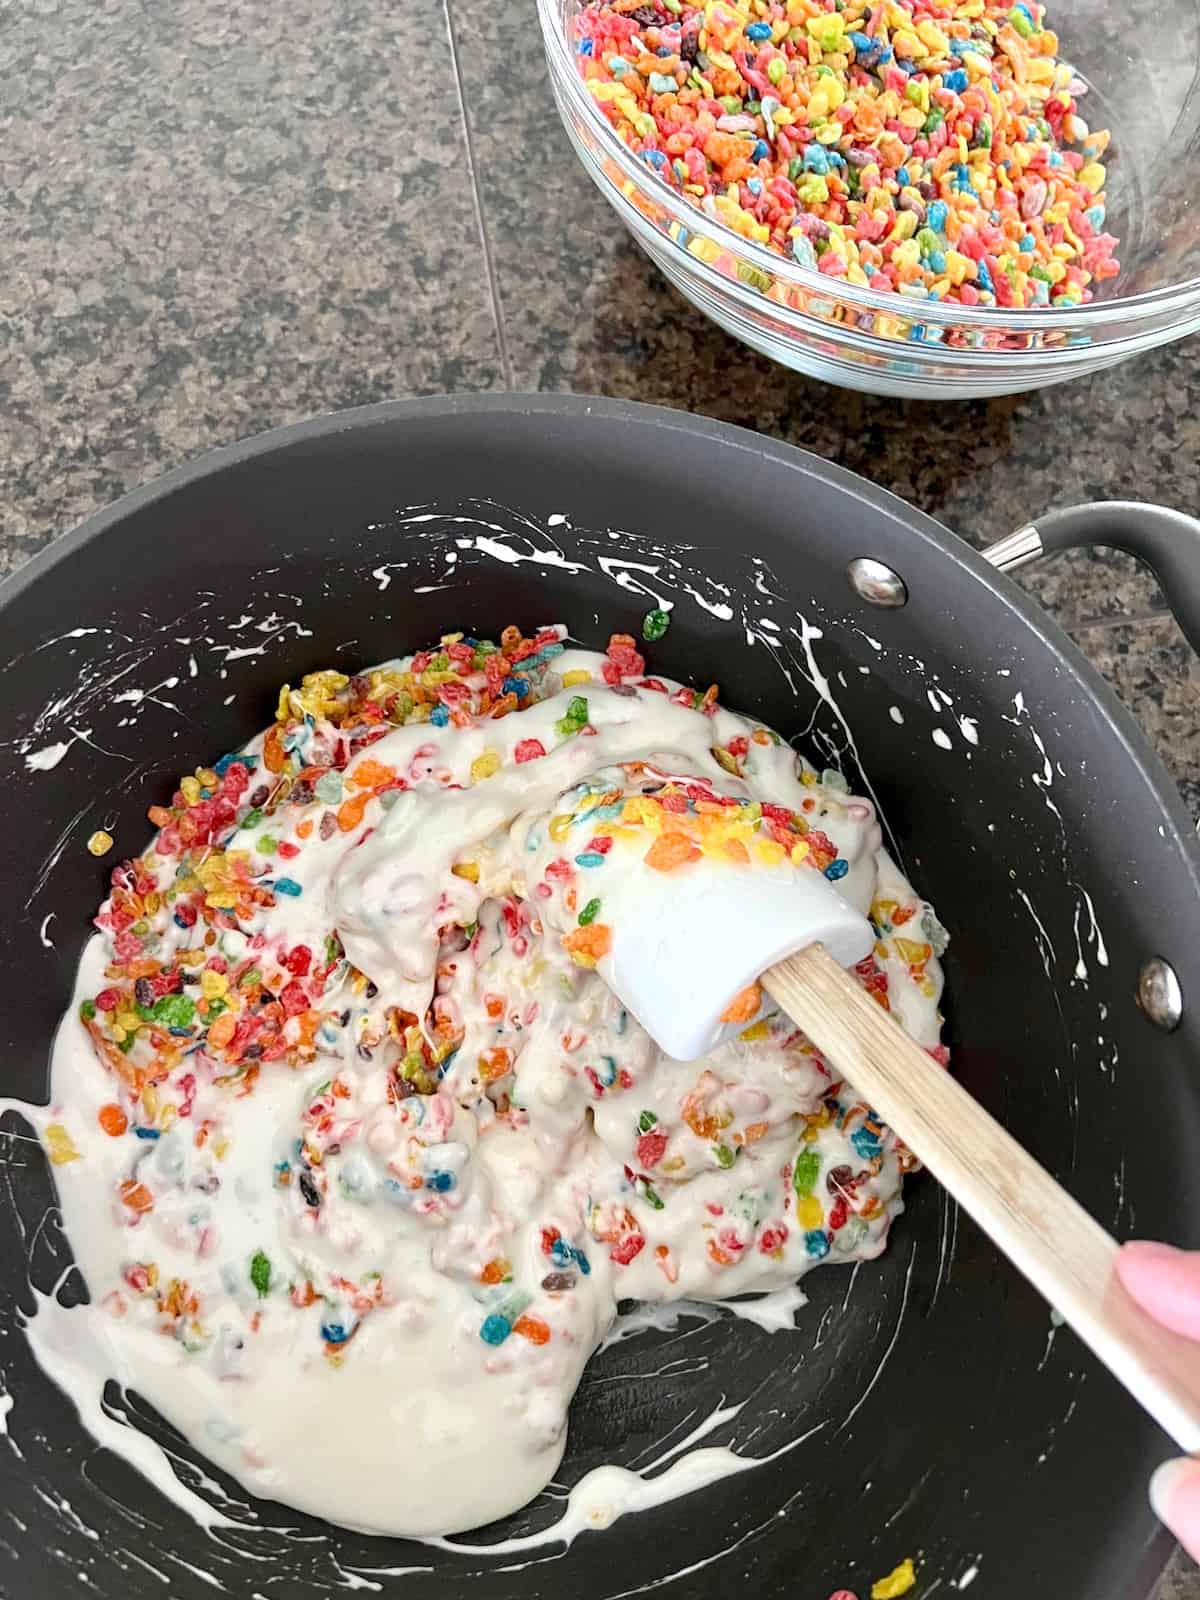 Stirring in the fruity pebbles to the melted marshmallows.